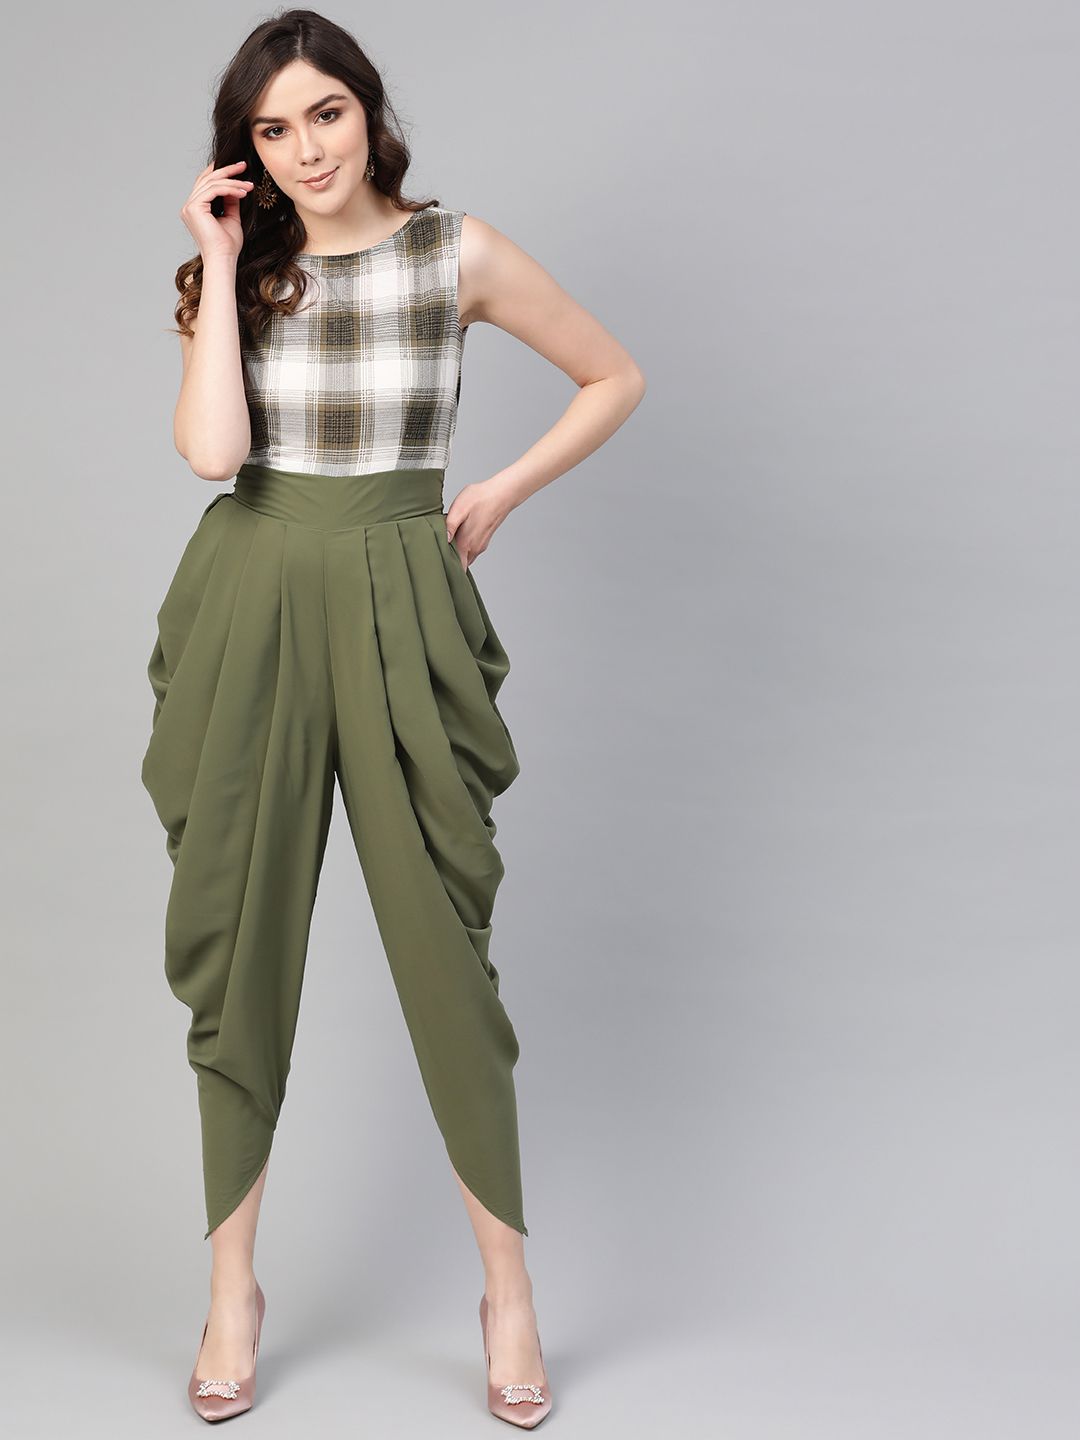 Zima Leto Women Olive Green & Off-White Checked Culotte Jumpsuit Price in India